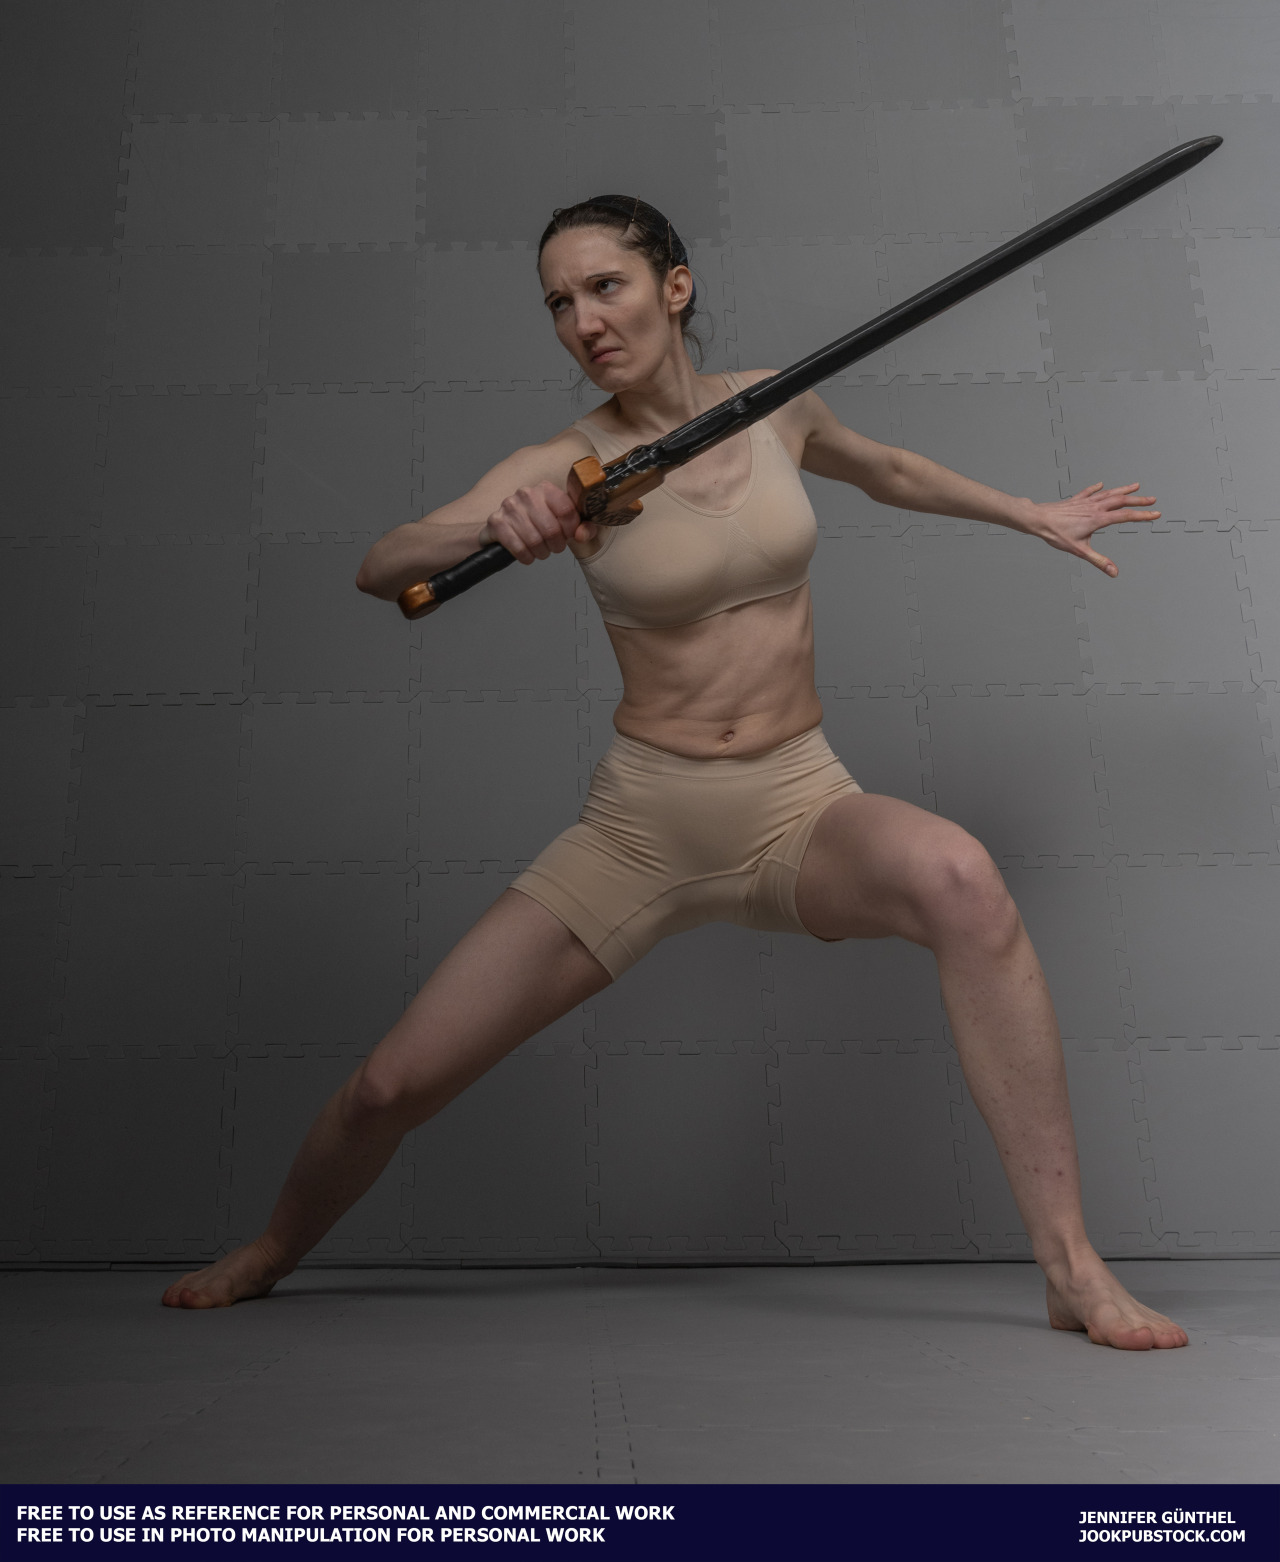 23,947 Young Girl Sword Images, Stock Photos, 3D objects, & Vectors |  Shutterstock